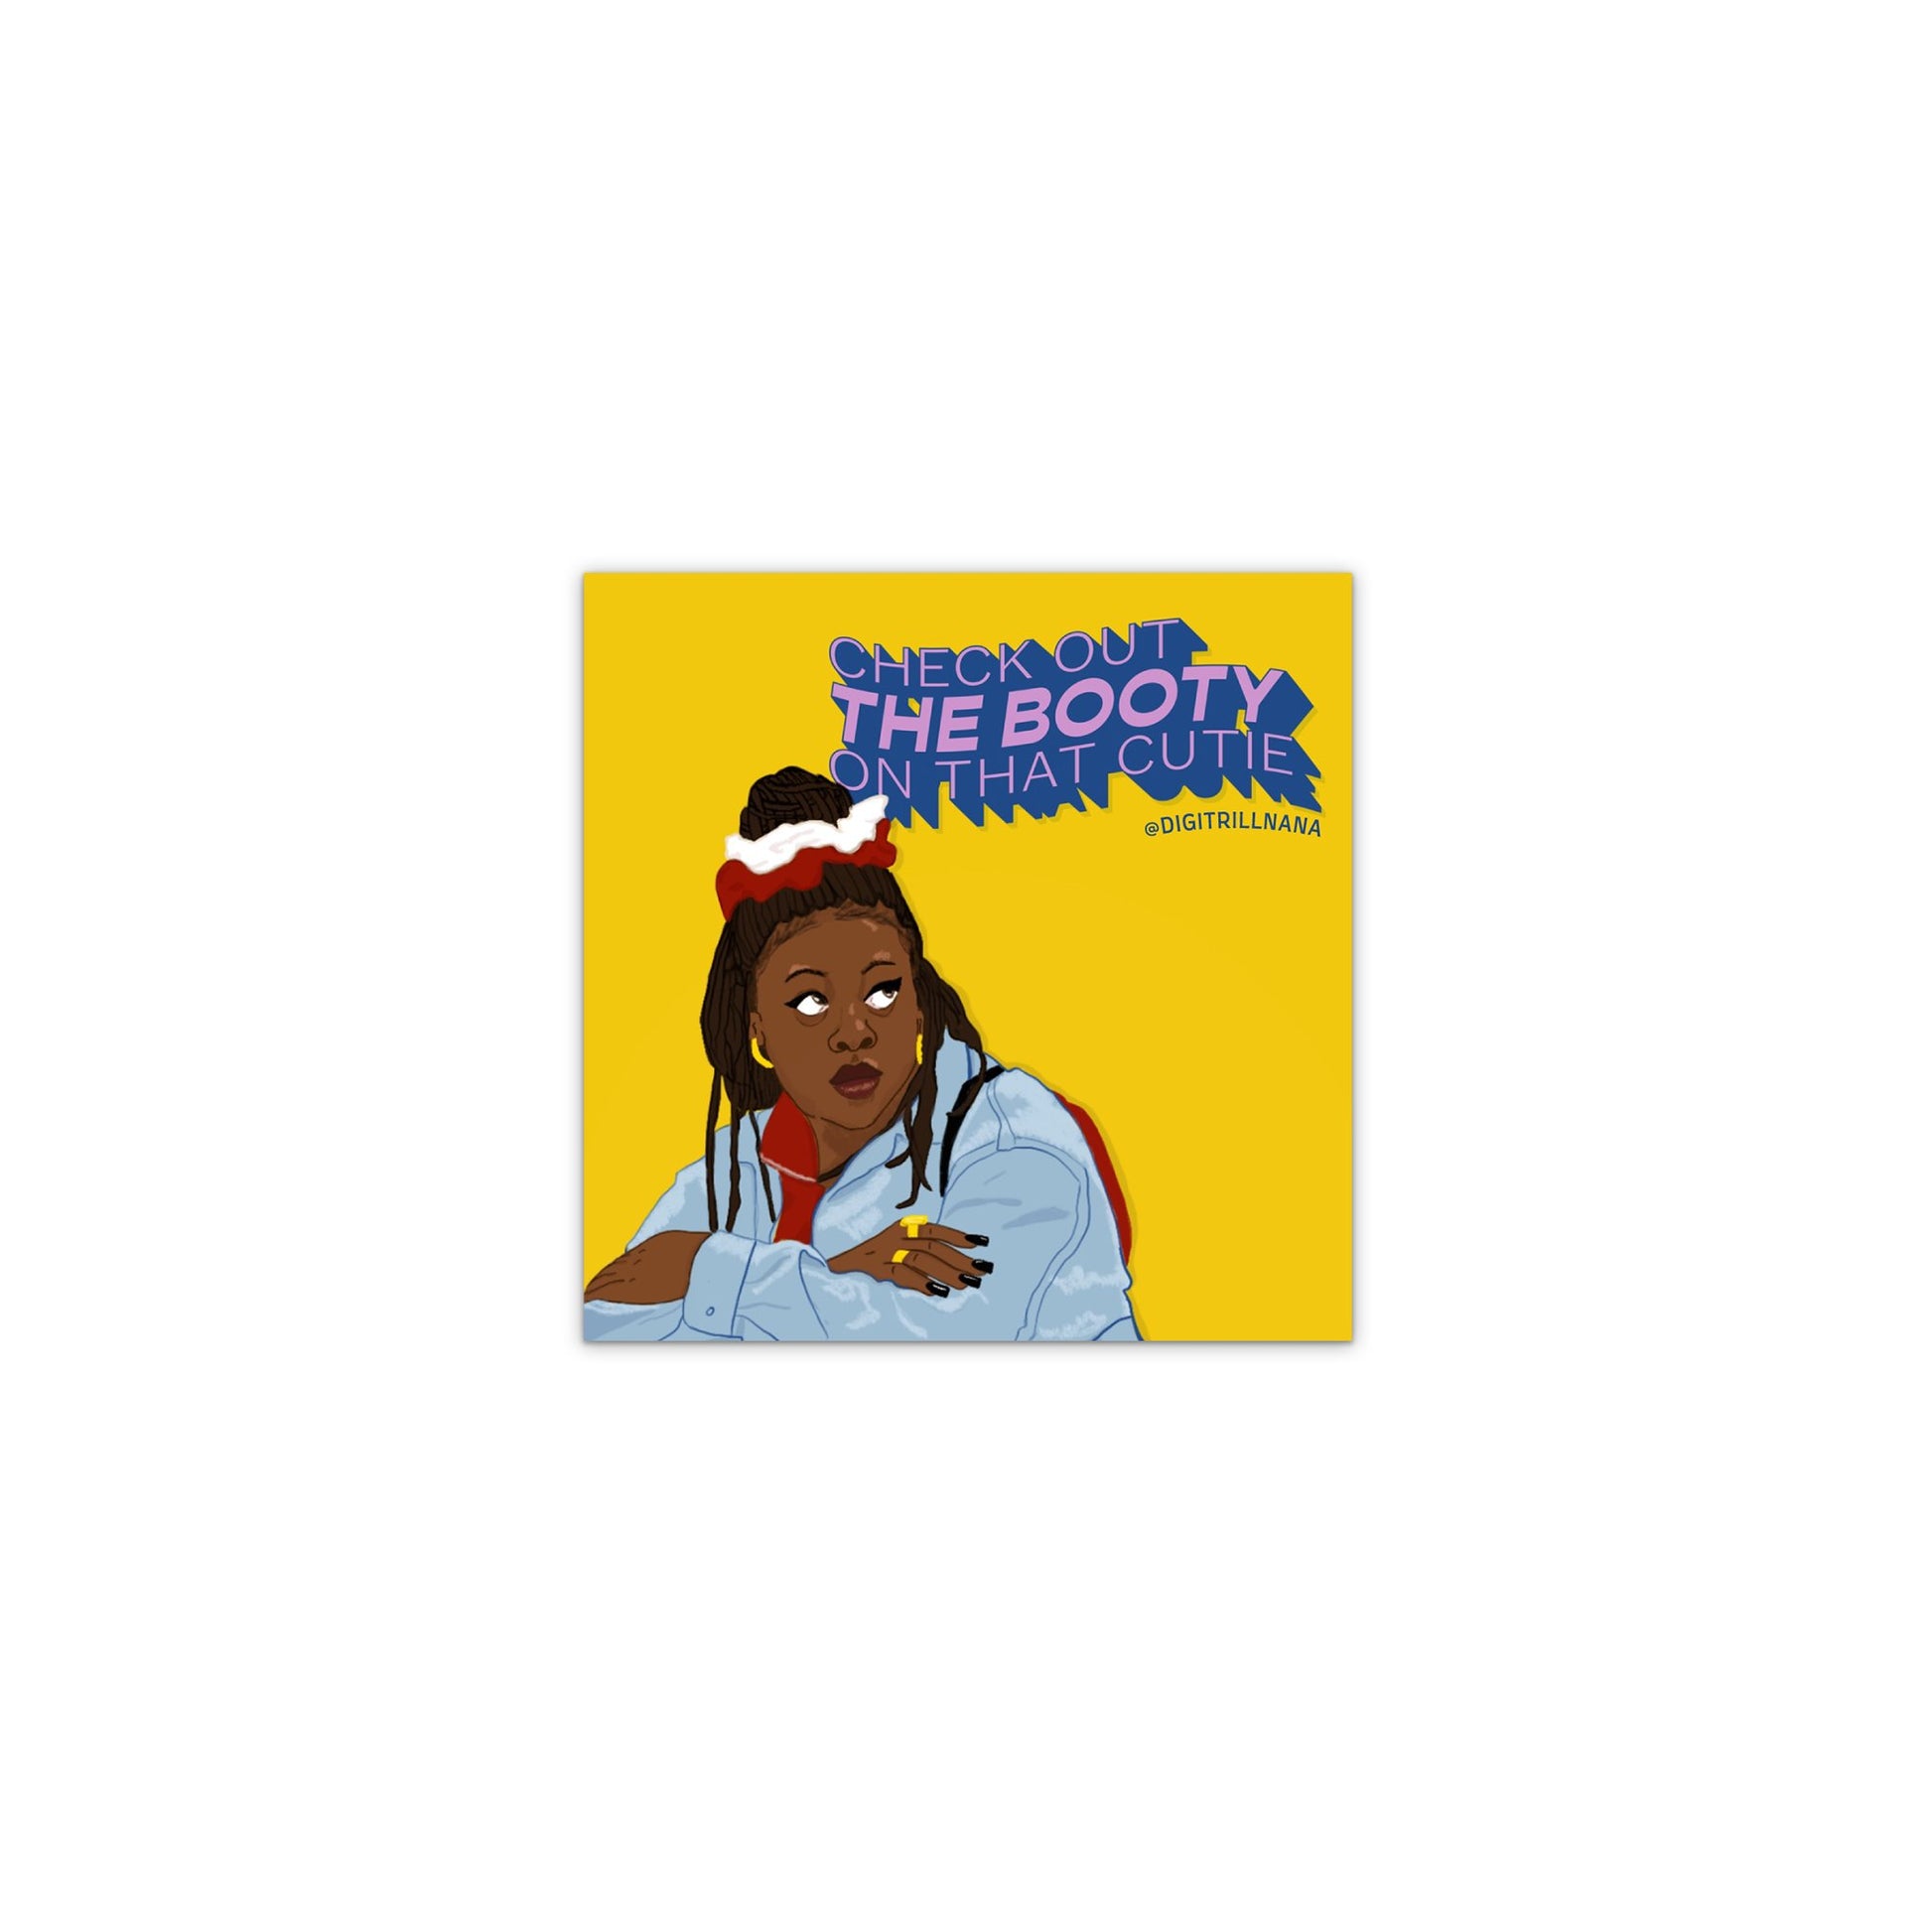 Kim Parker Moesha high quality die cut vinyl waterproof and scratch resistant sticker from Goods Made By Digitrillnana. Perfect for laptops, water bottles, phone cases, luggage, journals, and more! Black Woman Owned.